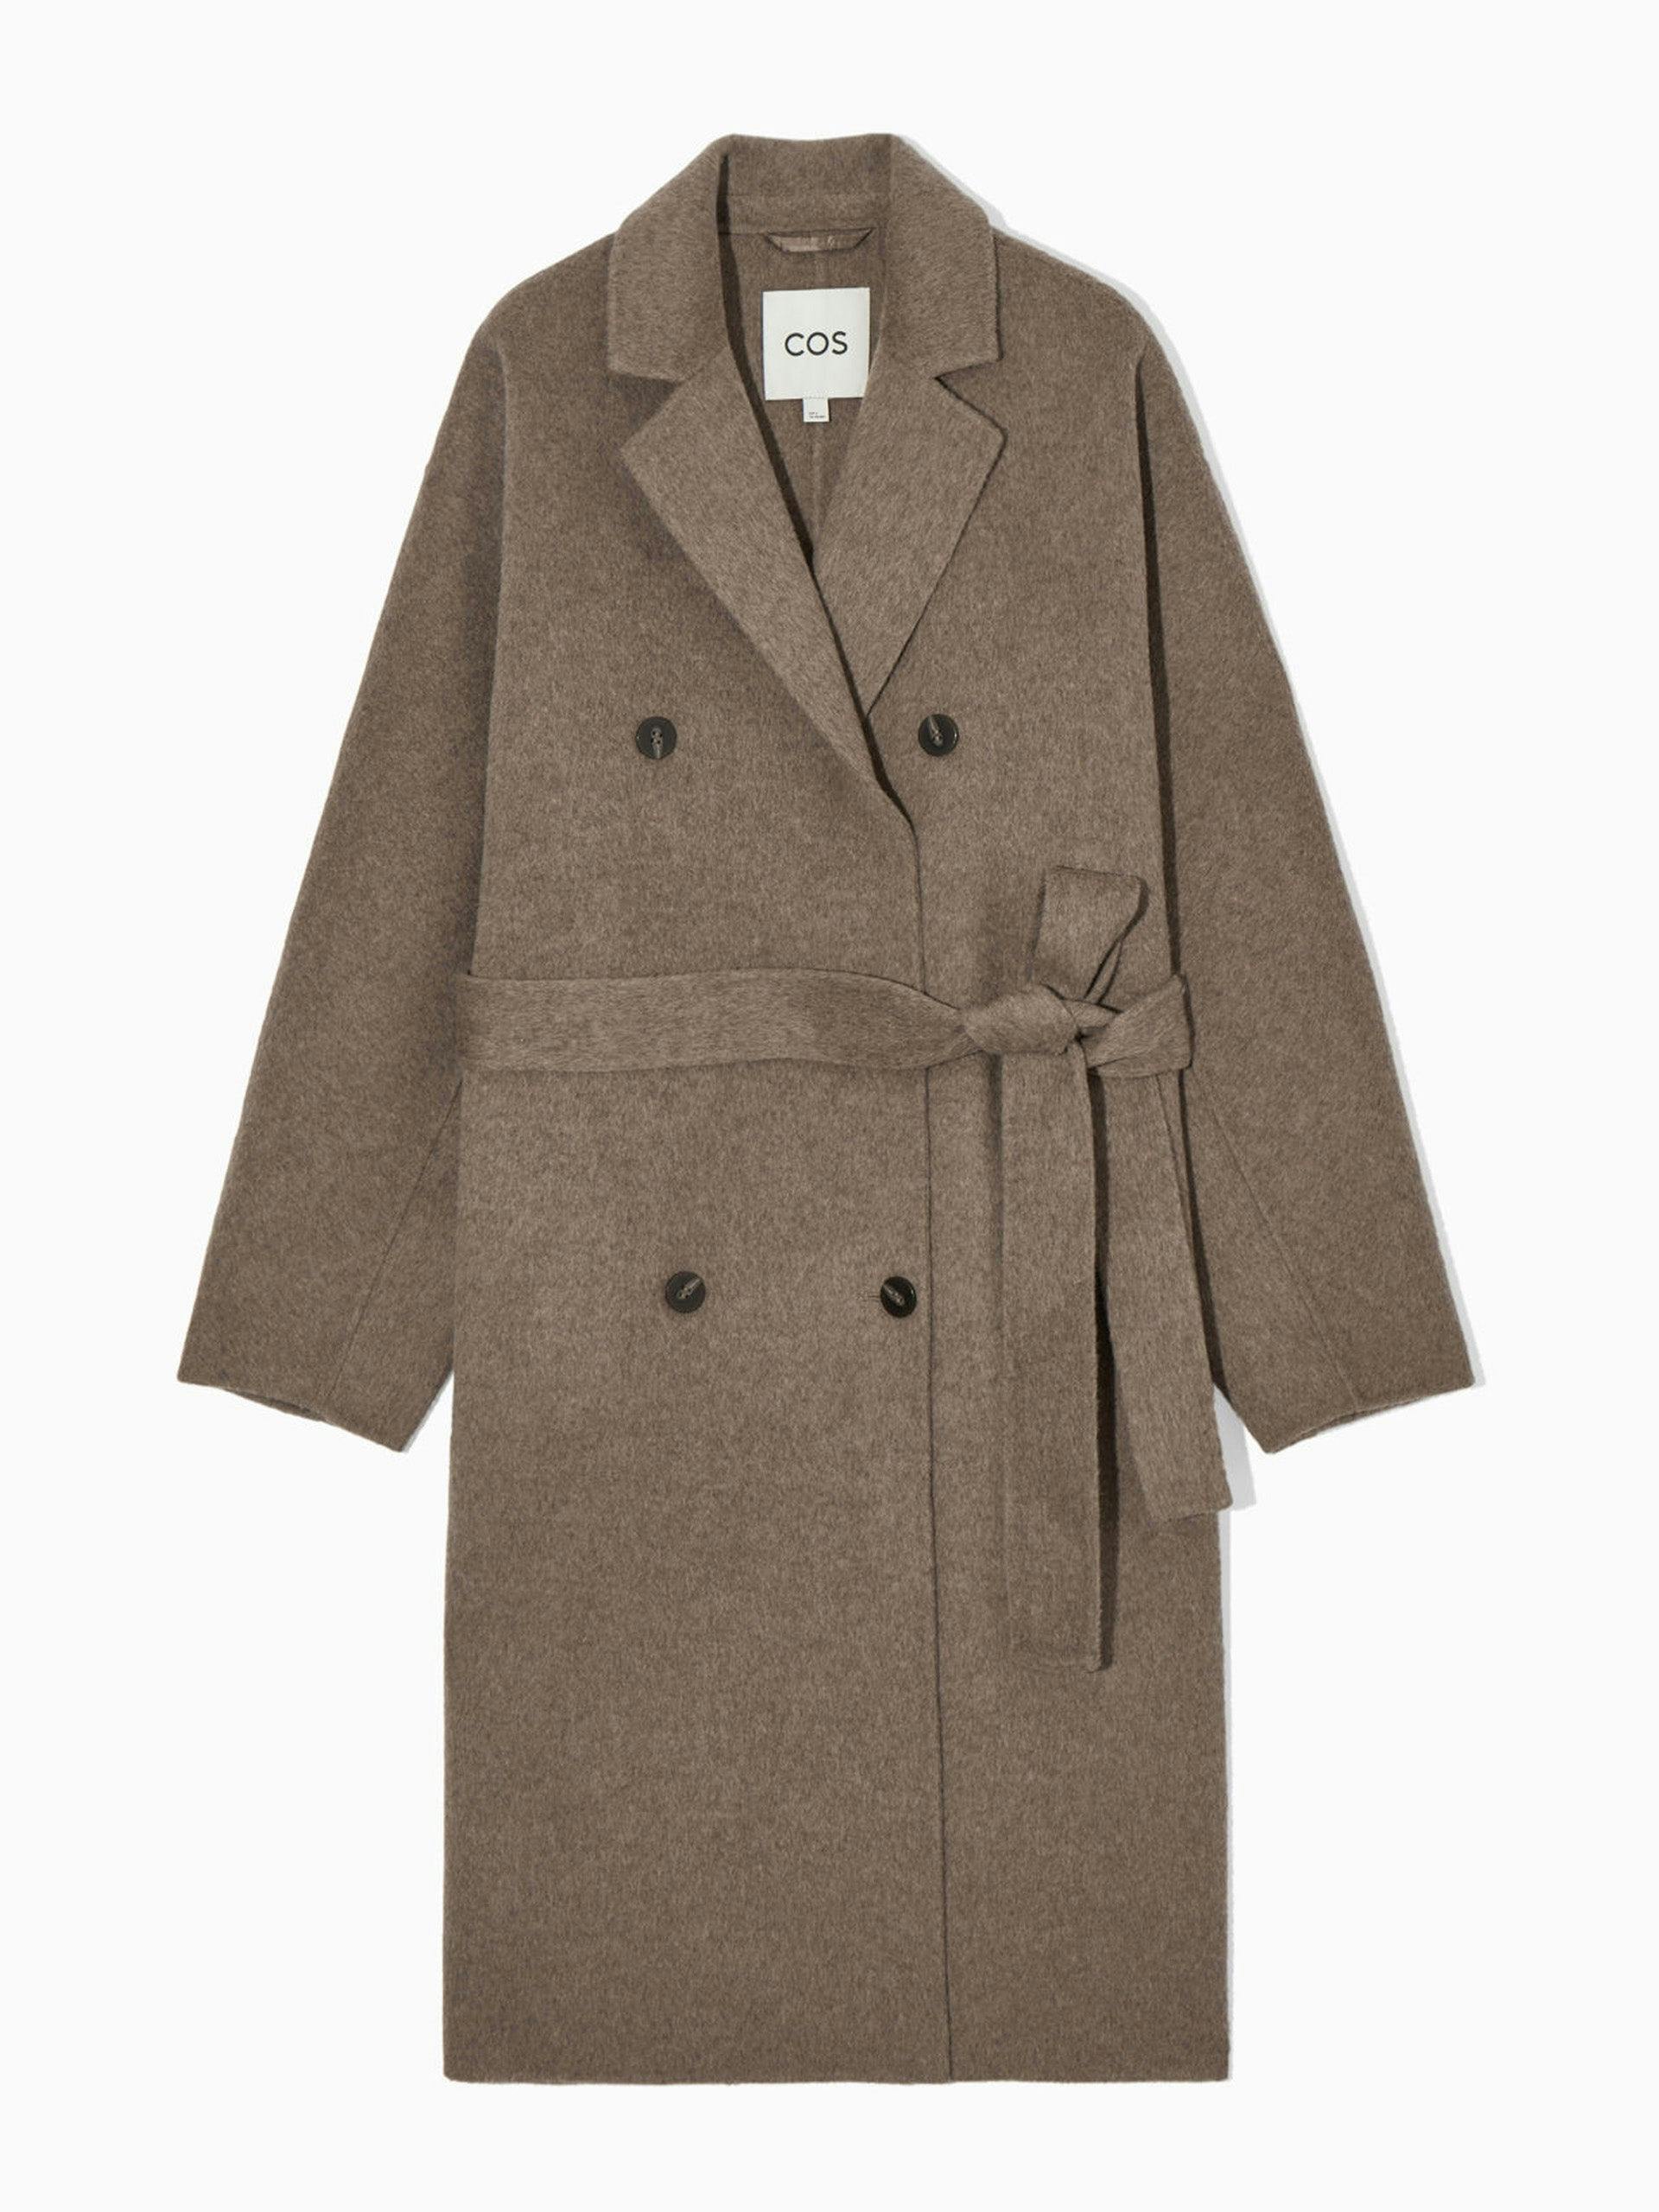 Oversized double breasted wool coat